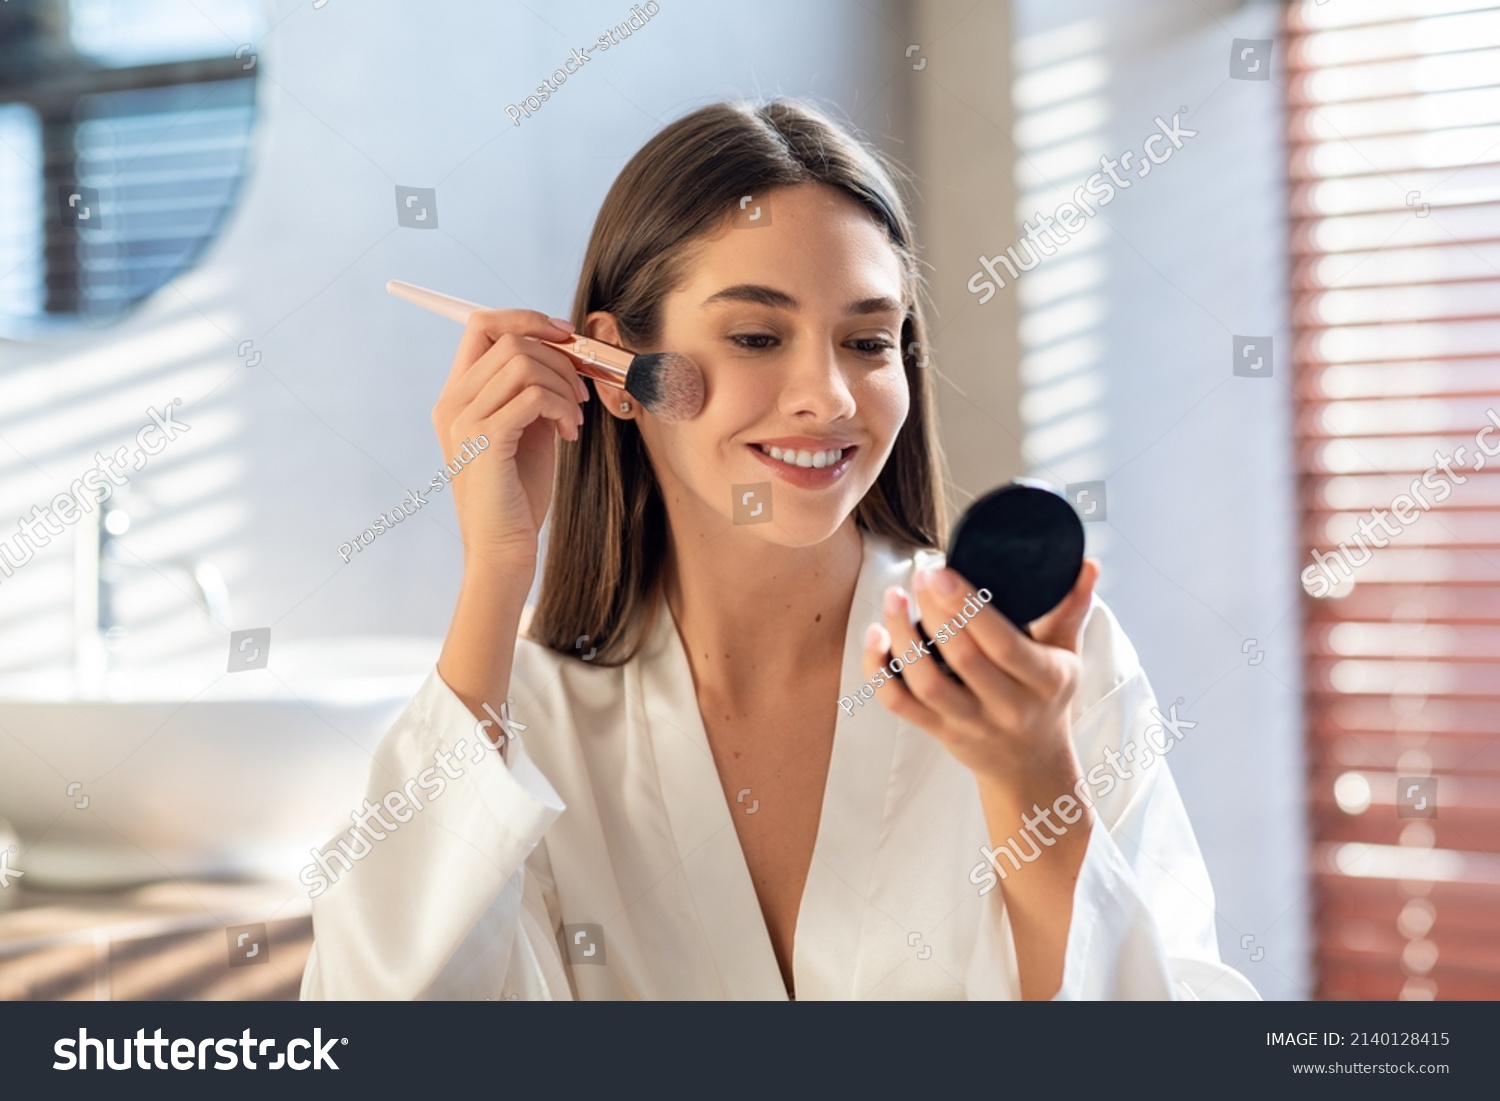 Daily Makeup. Smiling Young Female Applying Blush With Makeup Brush In Bathroom, Beautiful Happy Woman Wearing White Silk Robe Using New Cosmetics While Getting Ready At Home, Copy Space #2140128415